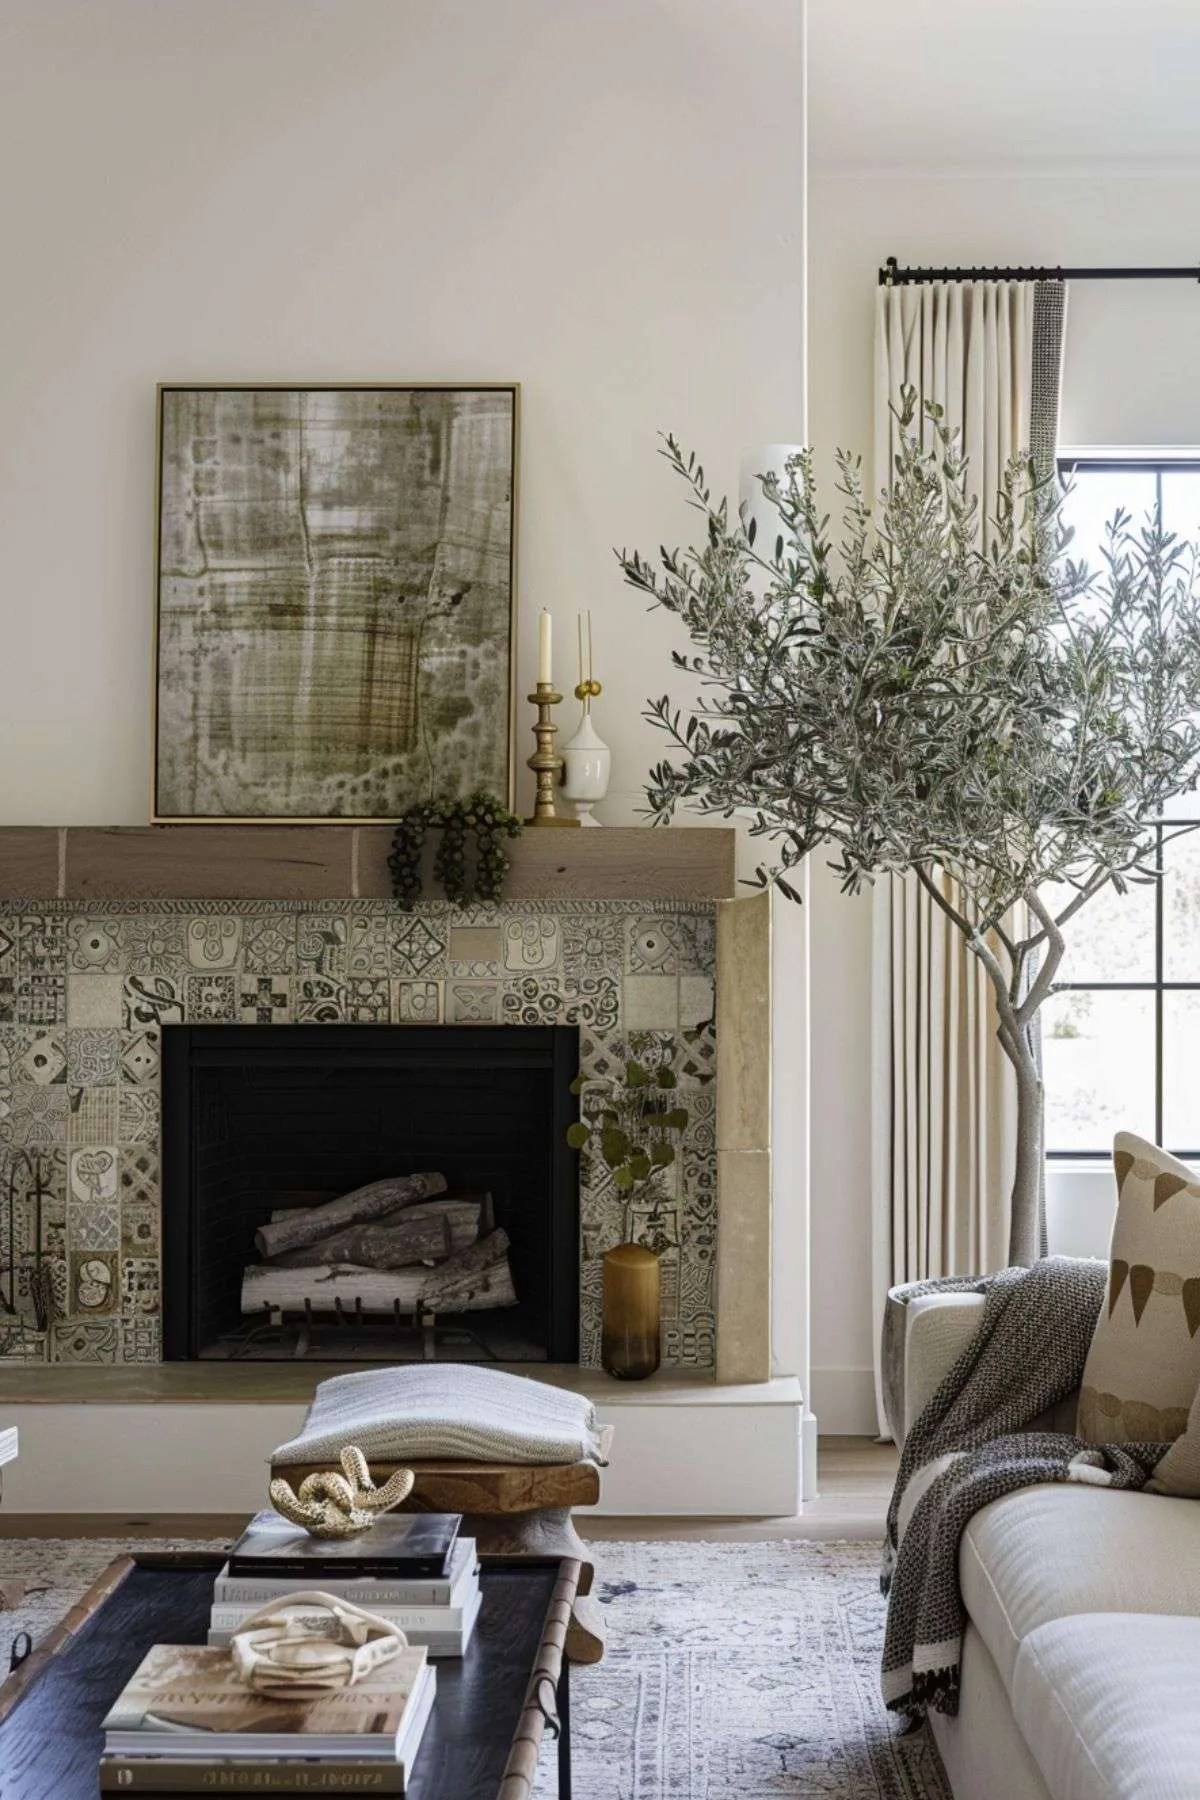 12 Indoor Plants that Will Make Your Home Feel Luxurious